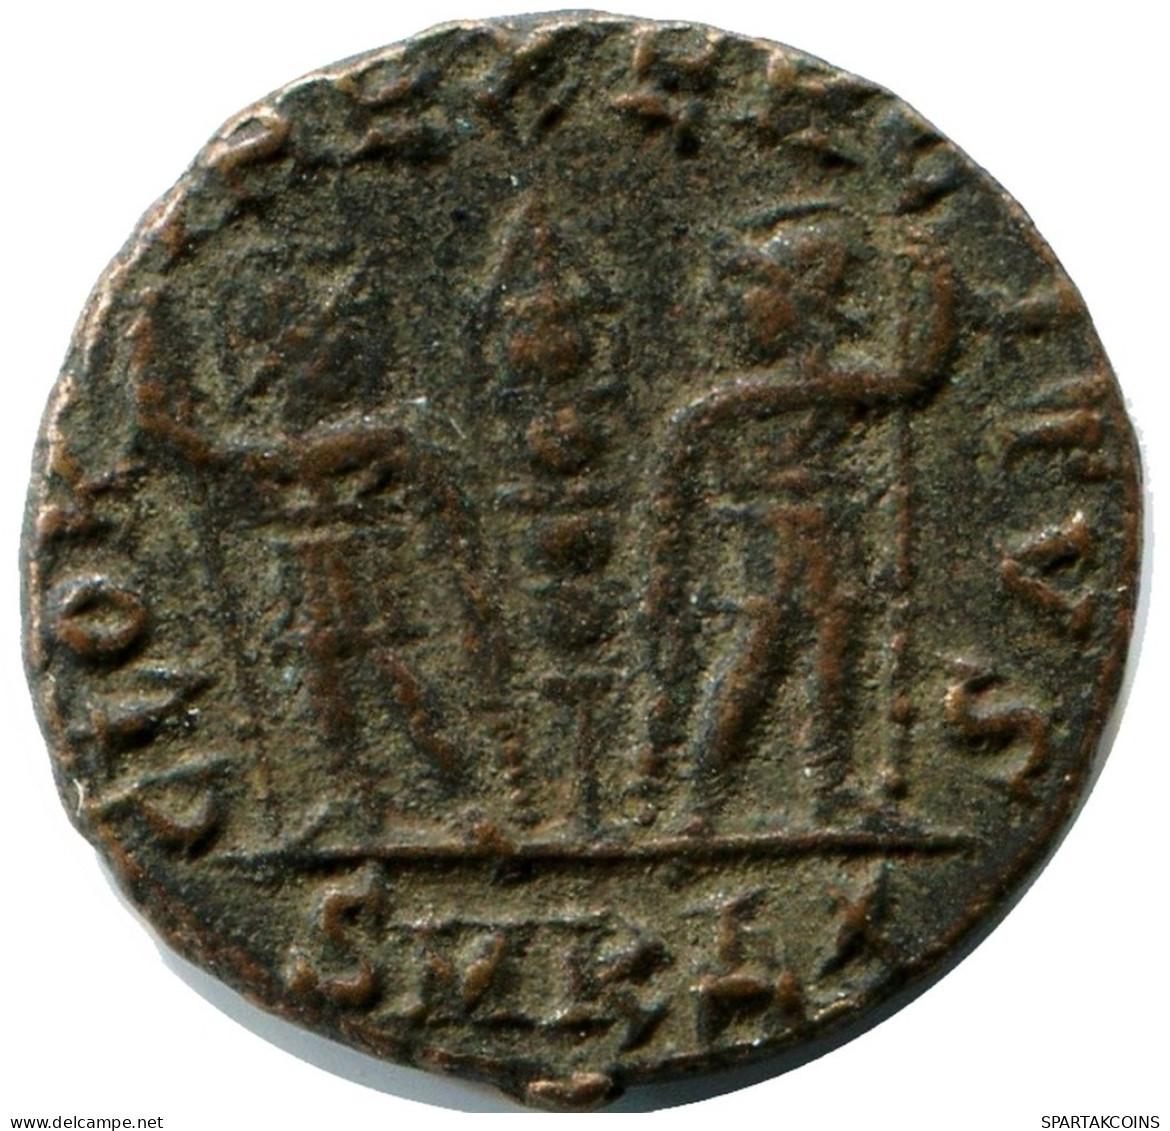 CONSTANS MINTED IN CYZICUS FOUND IN IHNASYAH HOARD EGYPT #ANC11625.14.U.A - The Christian Empire (307 AD To 363 AD)